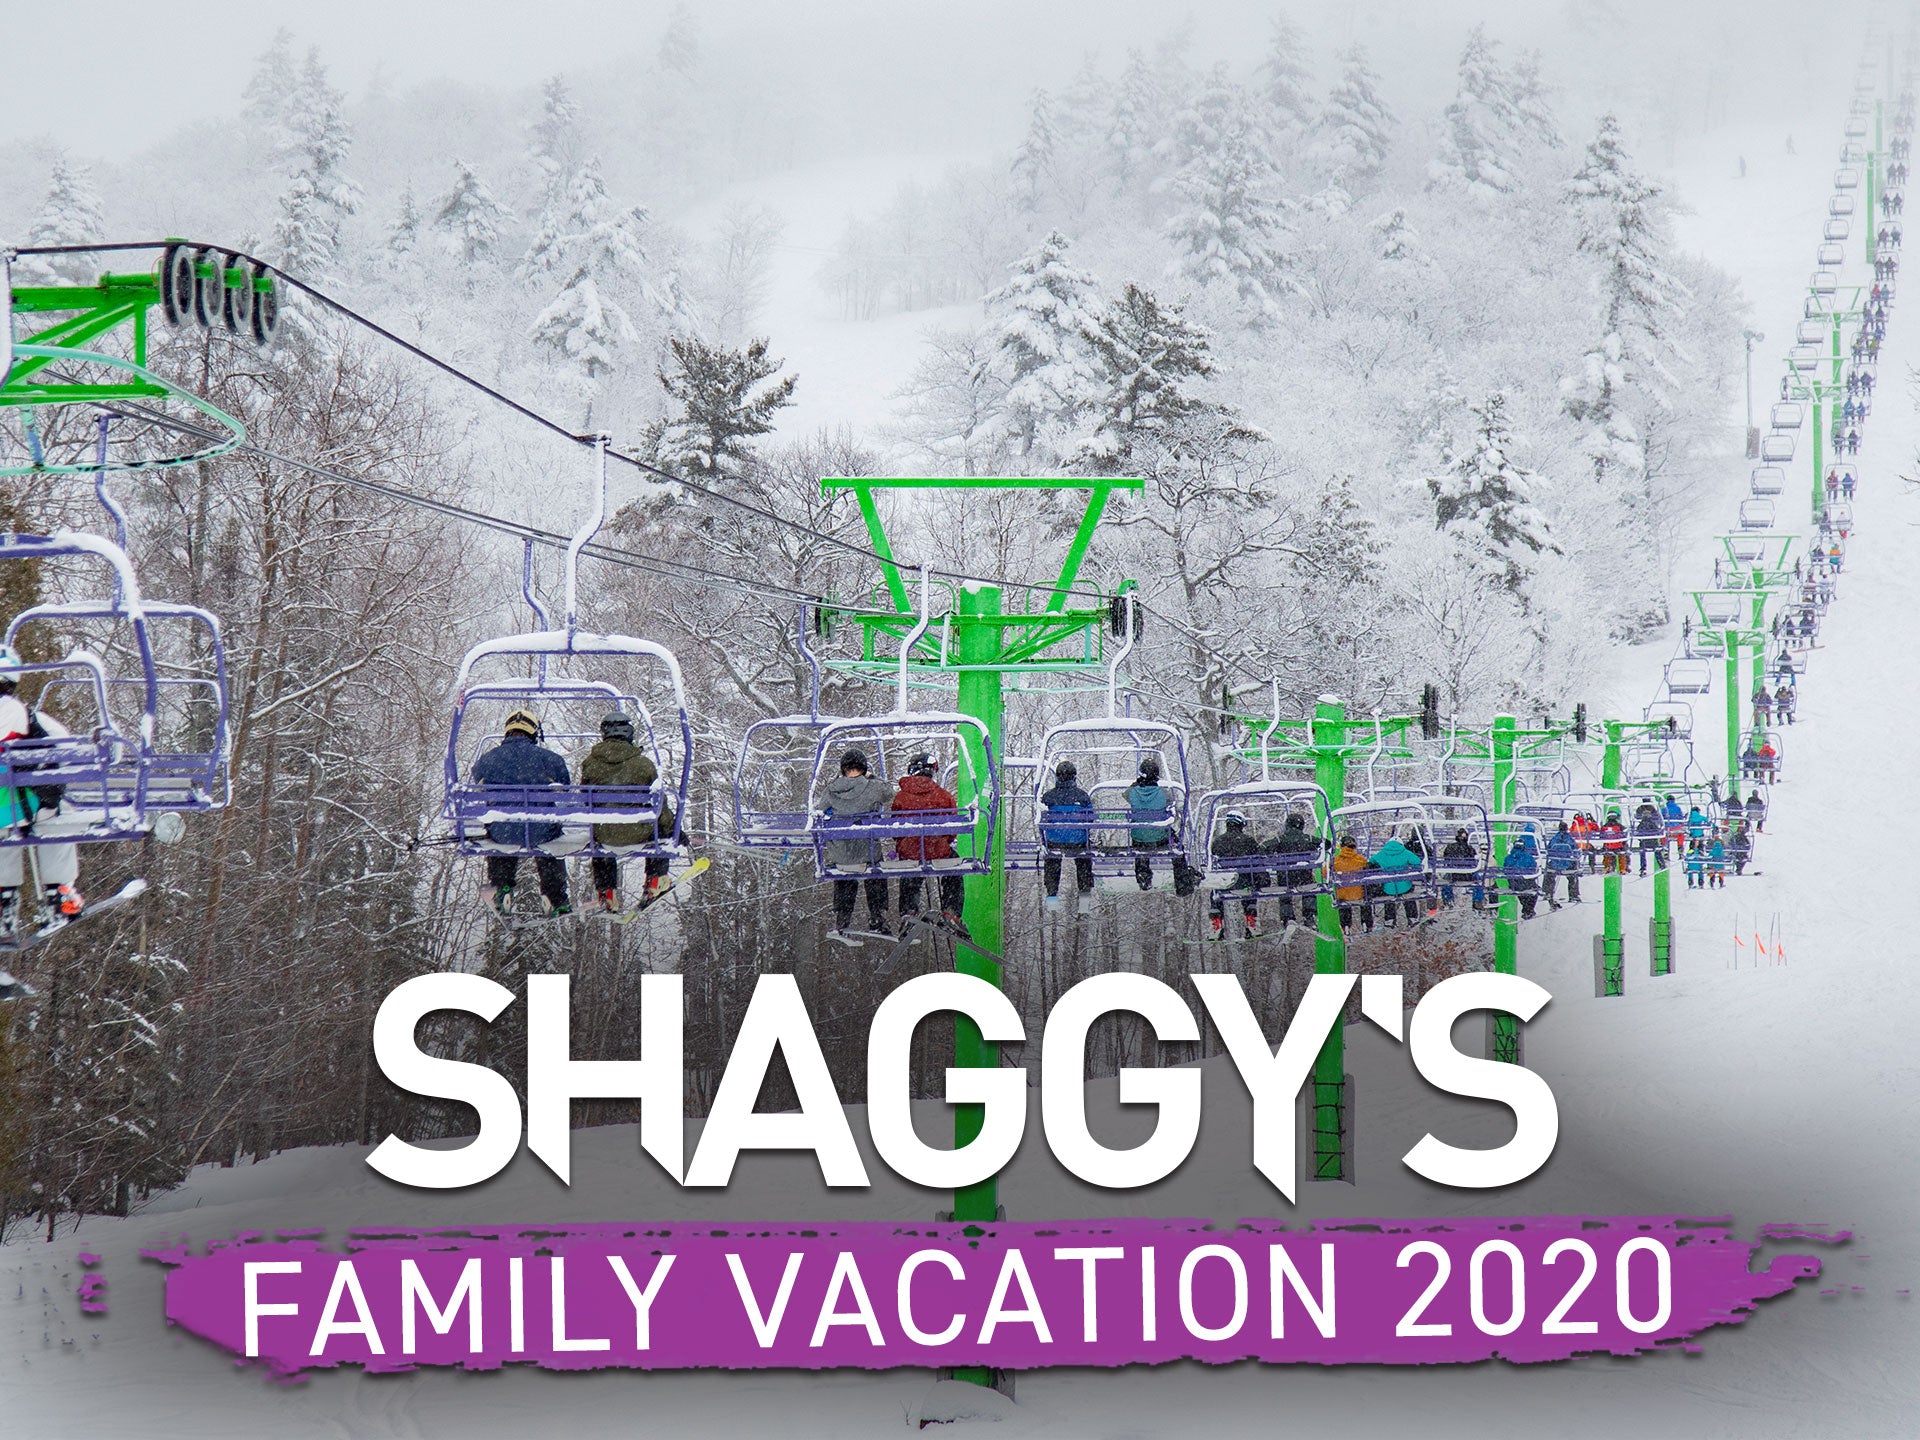 Shaggy's Family Vacation at Mount Bohemia - Extreme skiing in Michigan